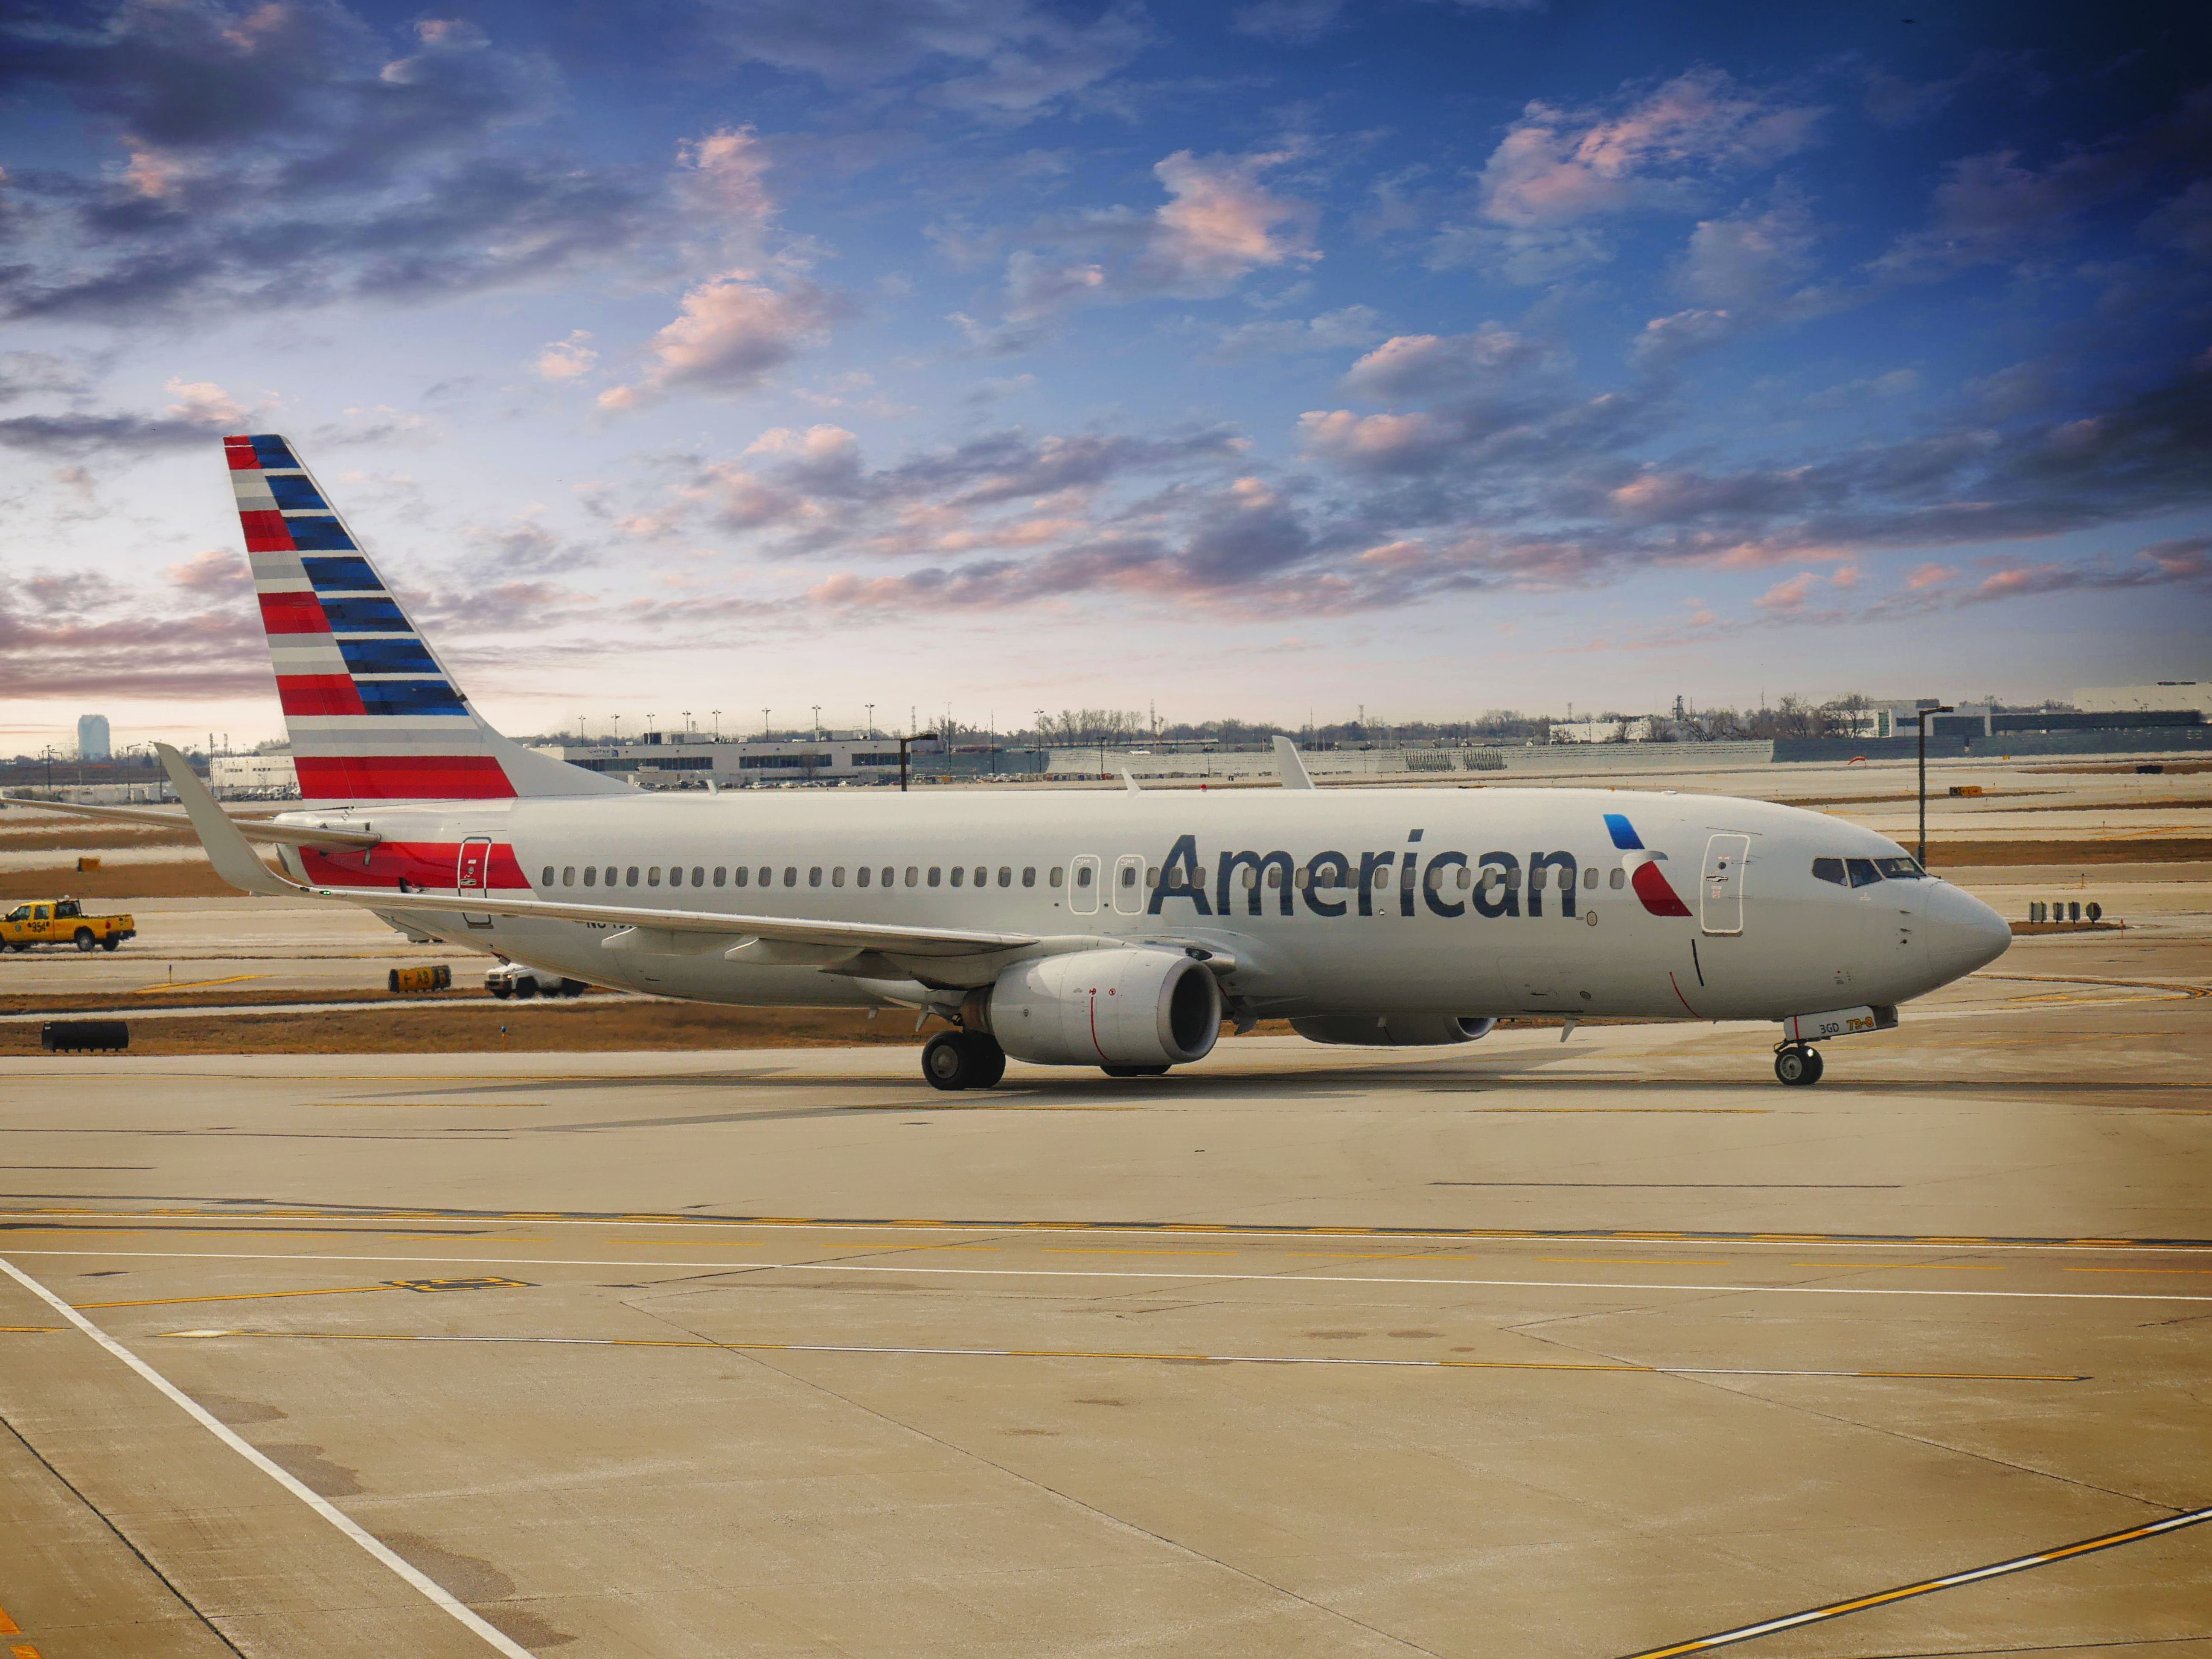 An American Airlines aircraft on an airport apron.